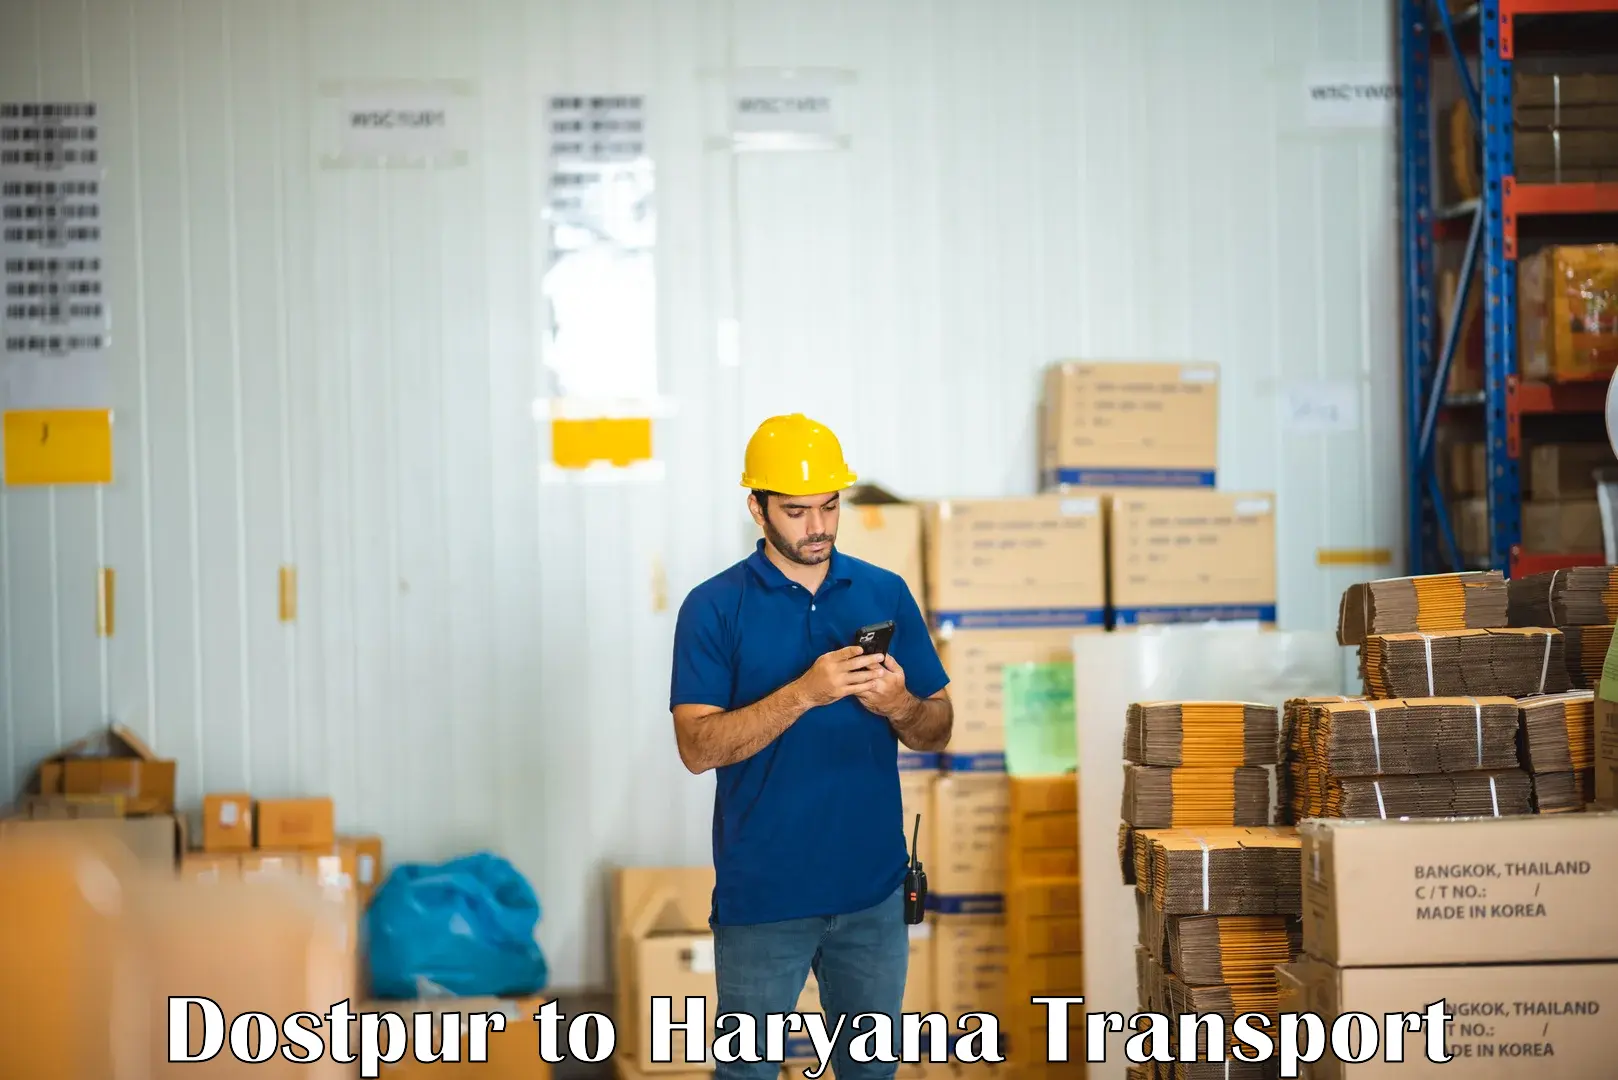 Container transport service Dostpur to Haryana